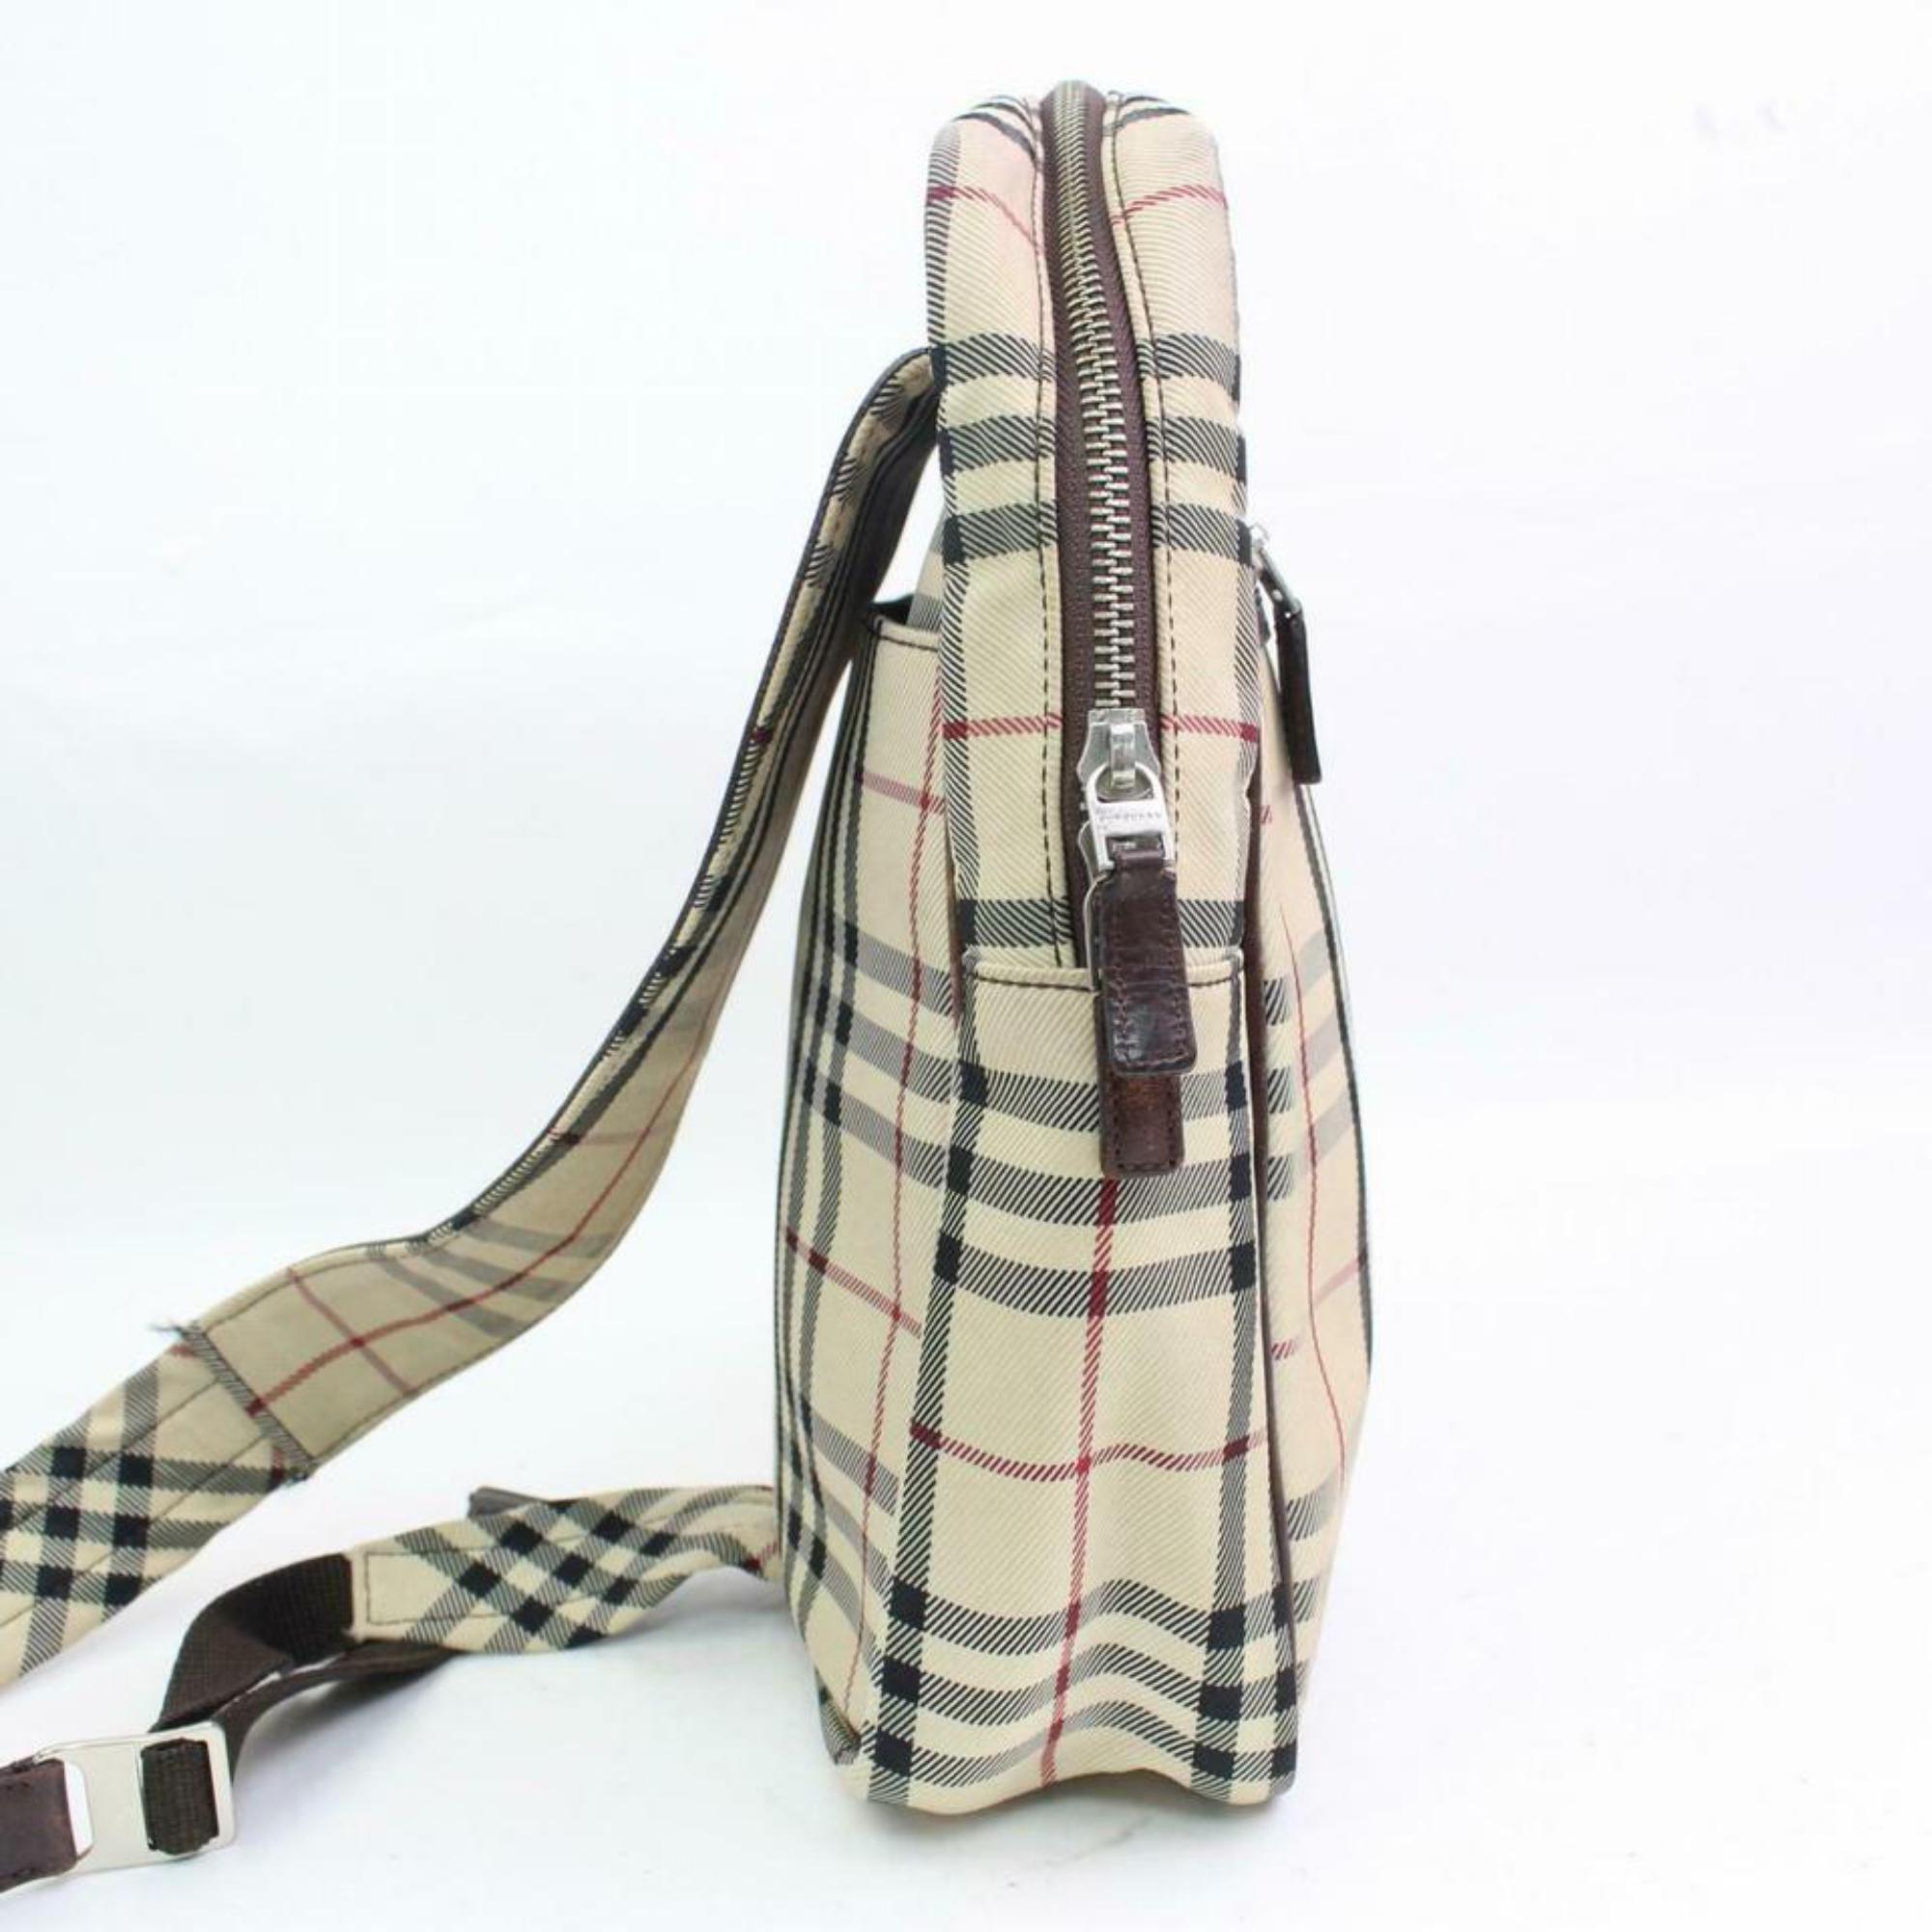 Burberry Nova Check Banana Hip Wait Bum 870629 Beige Canvas Cross Body Bag In Good Condition For Sale In Forest Hills, NY